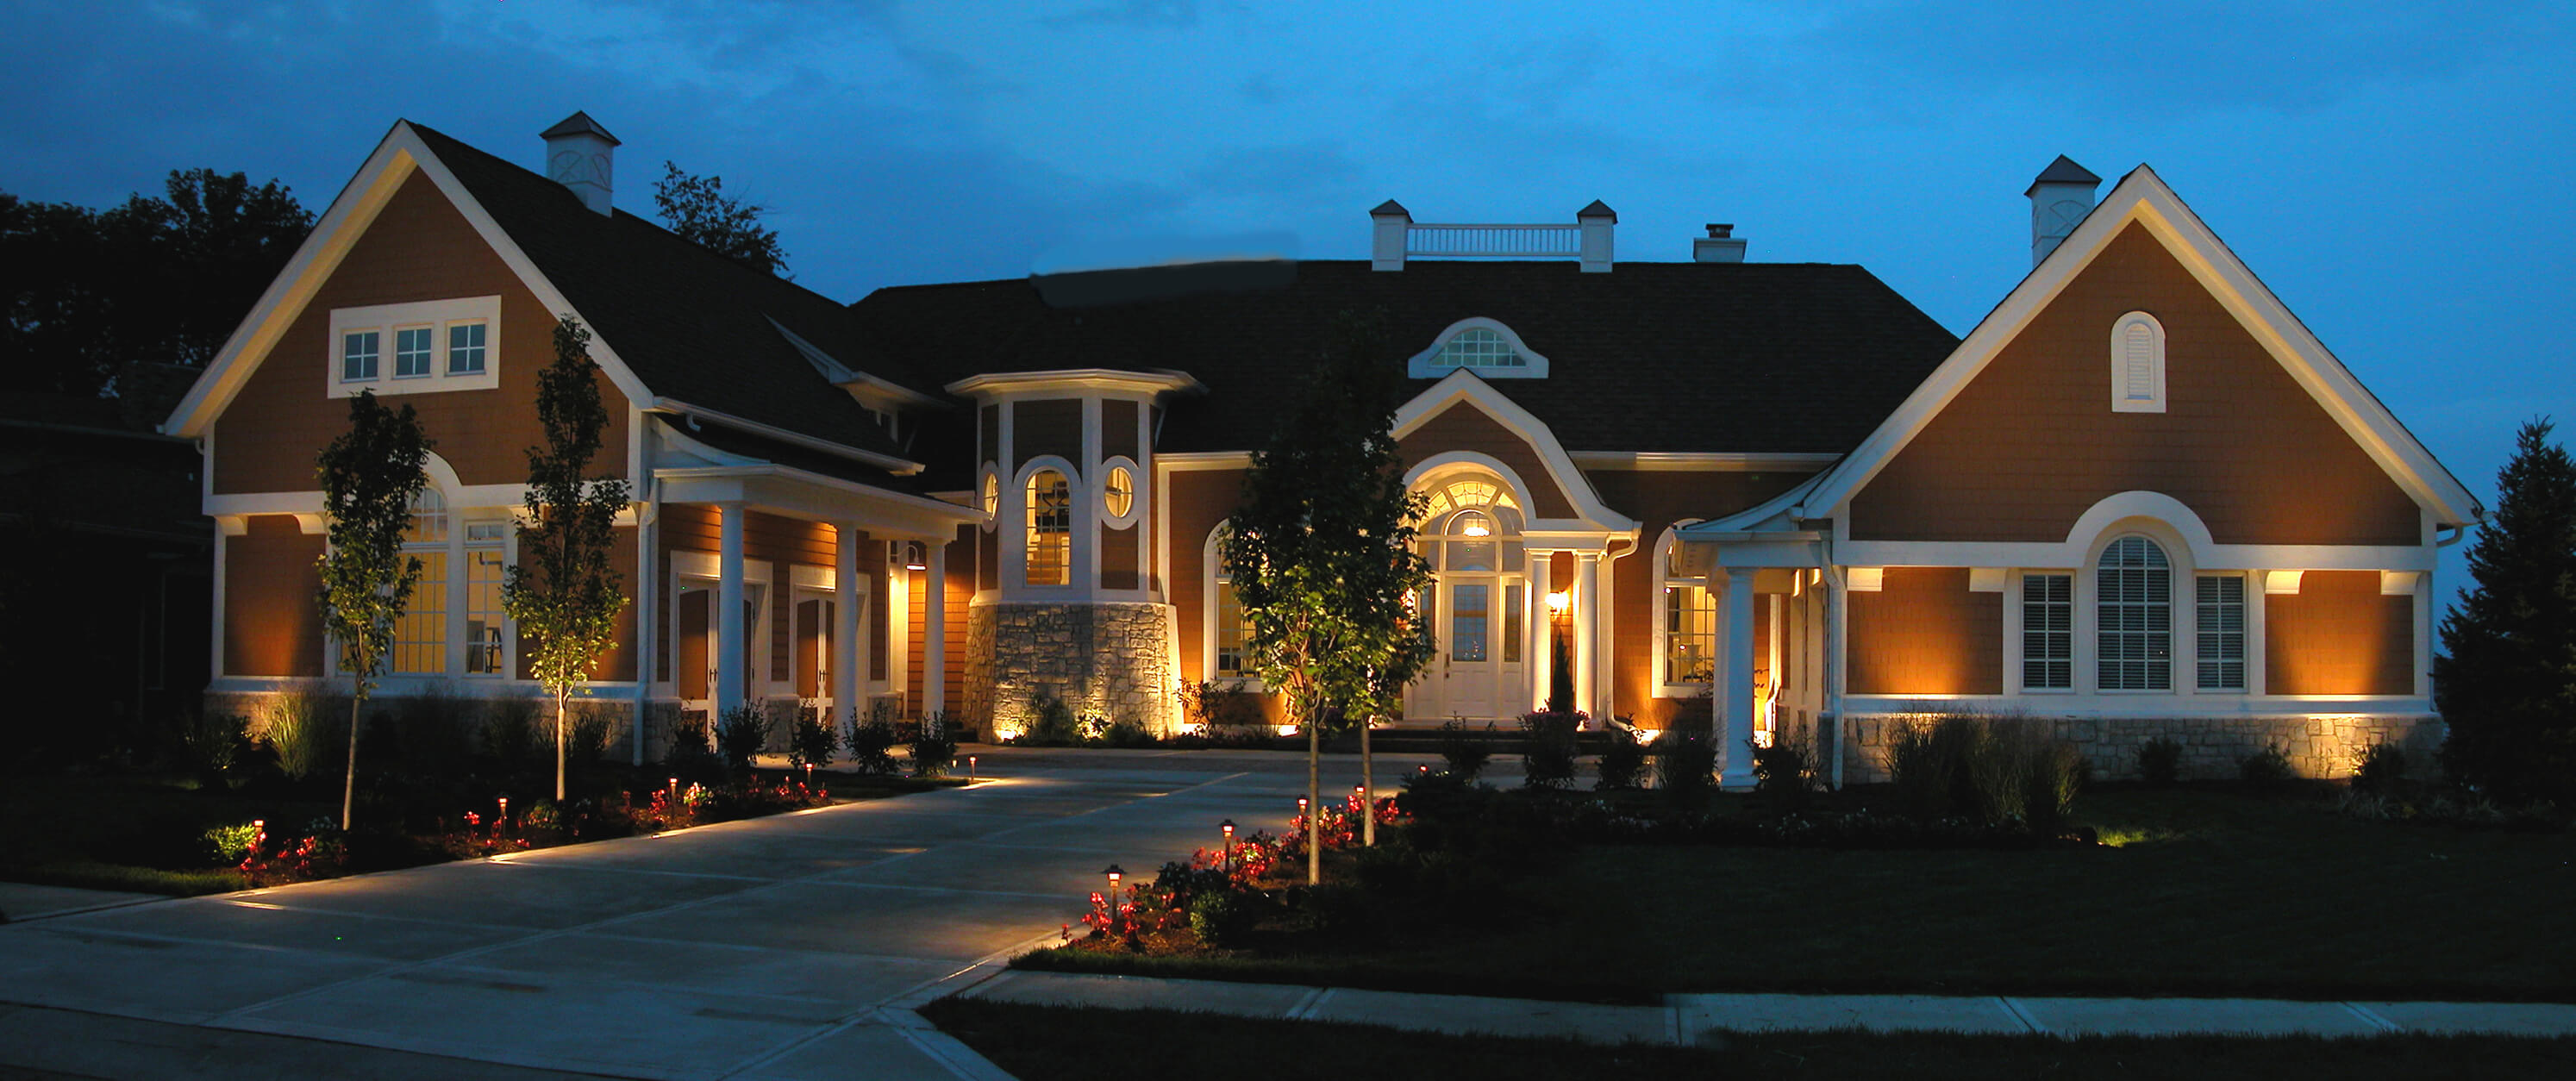 Red and white building and driveway that has specialty lighting